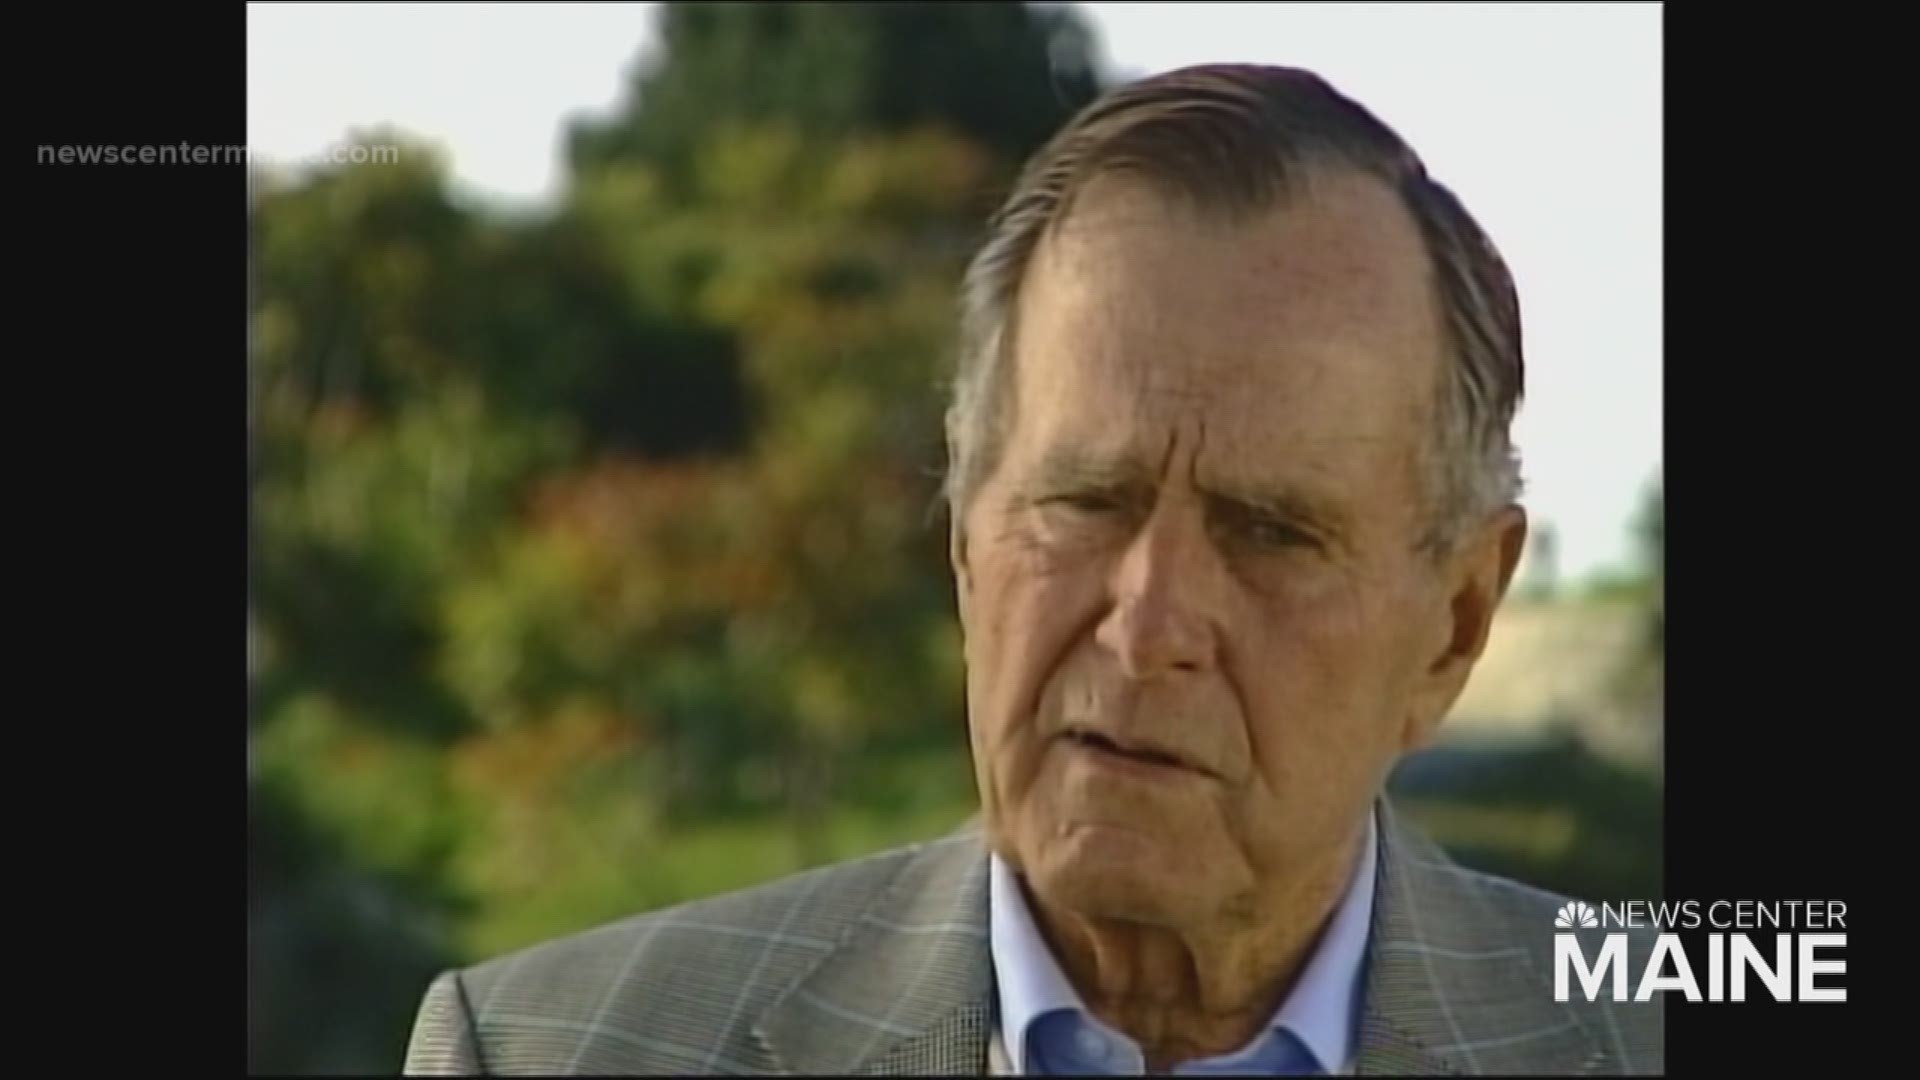 Conversations & fishing with George H. W. Bush.